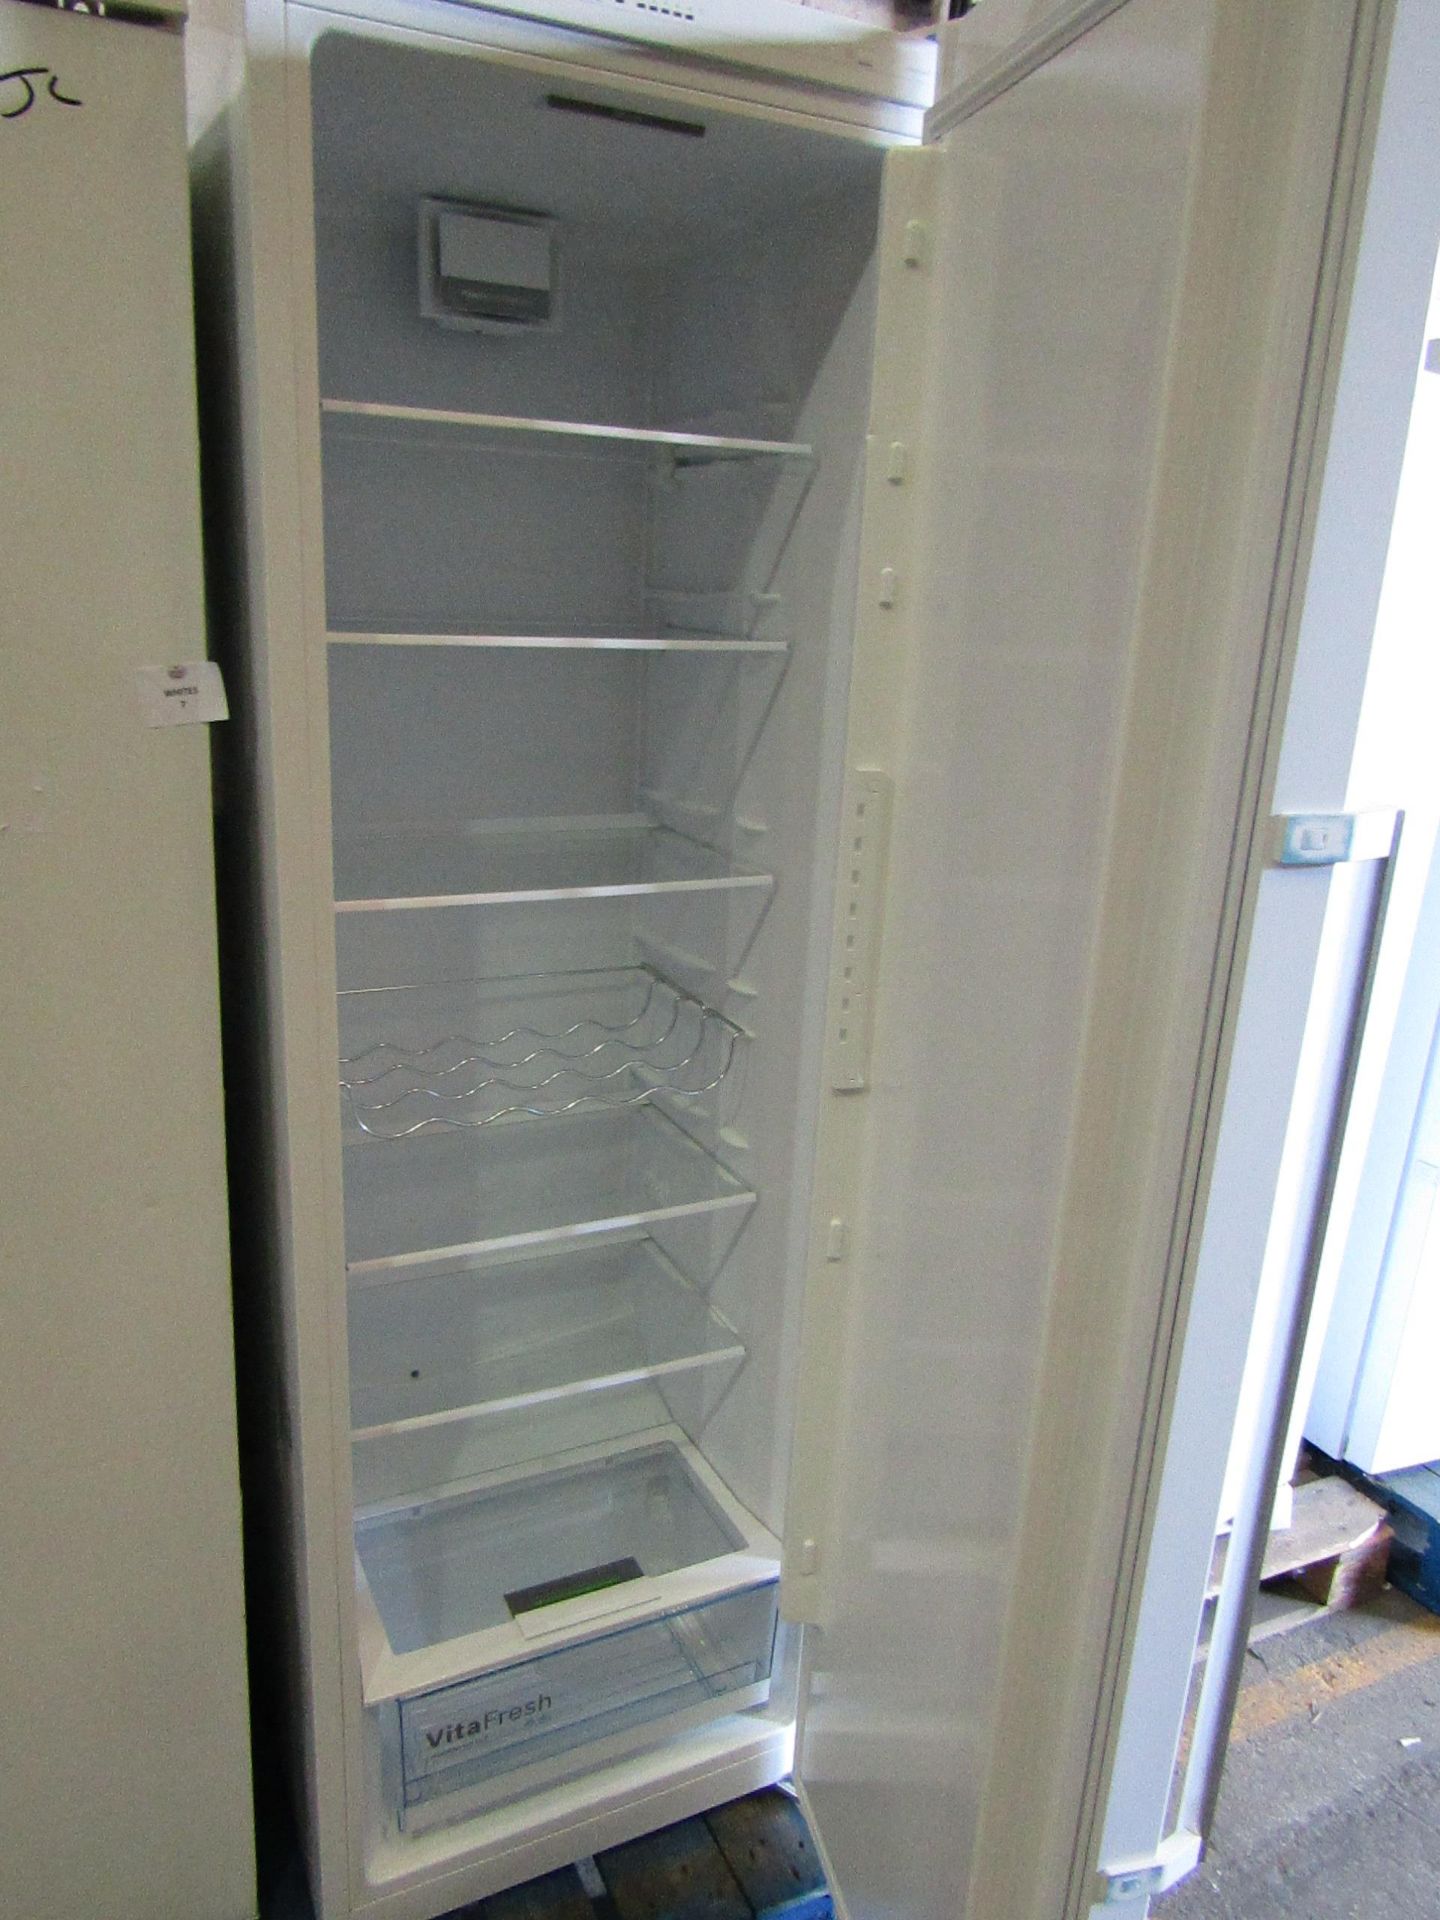 Bosch - Free-Standing Tall Fridge - Item Powers On But Does Not Get Cold. - Image 2 of 2